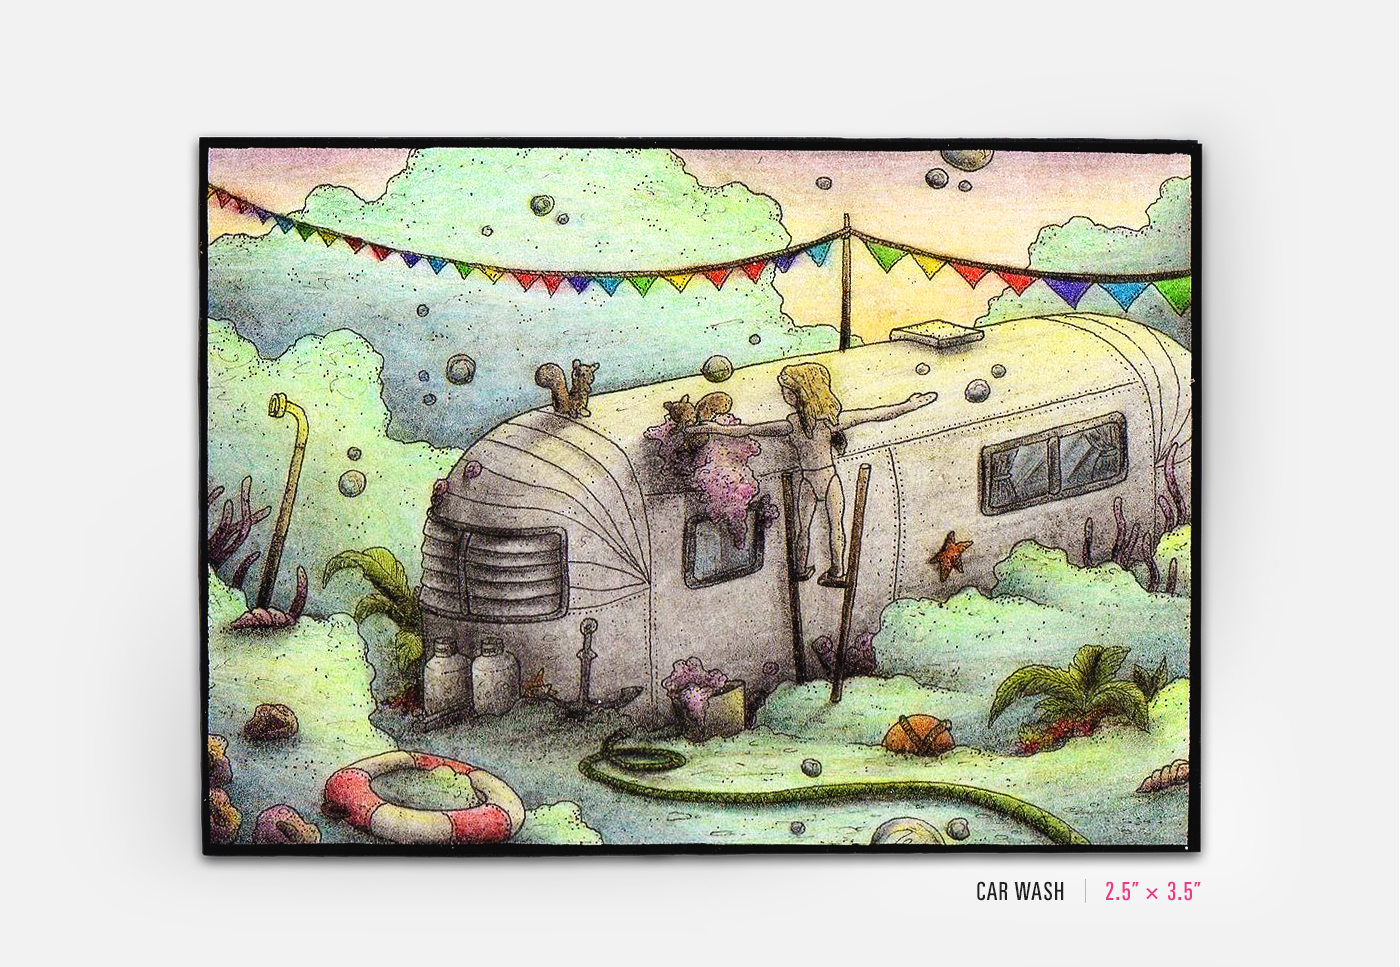 colored pencil pencil ink art trading card aceo Small Format Art fantasy surreal ILLUSTRATION  Drawing 